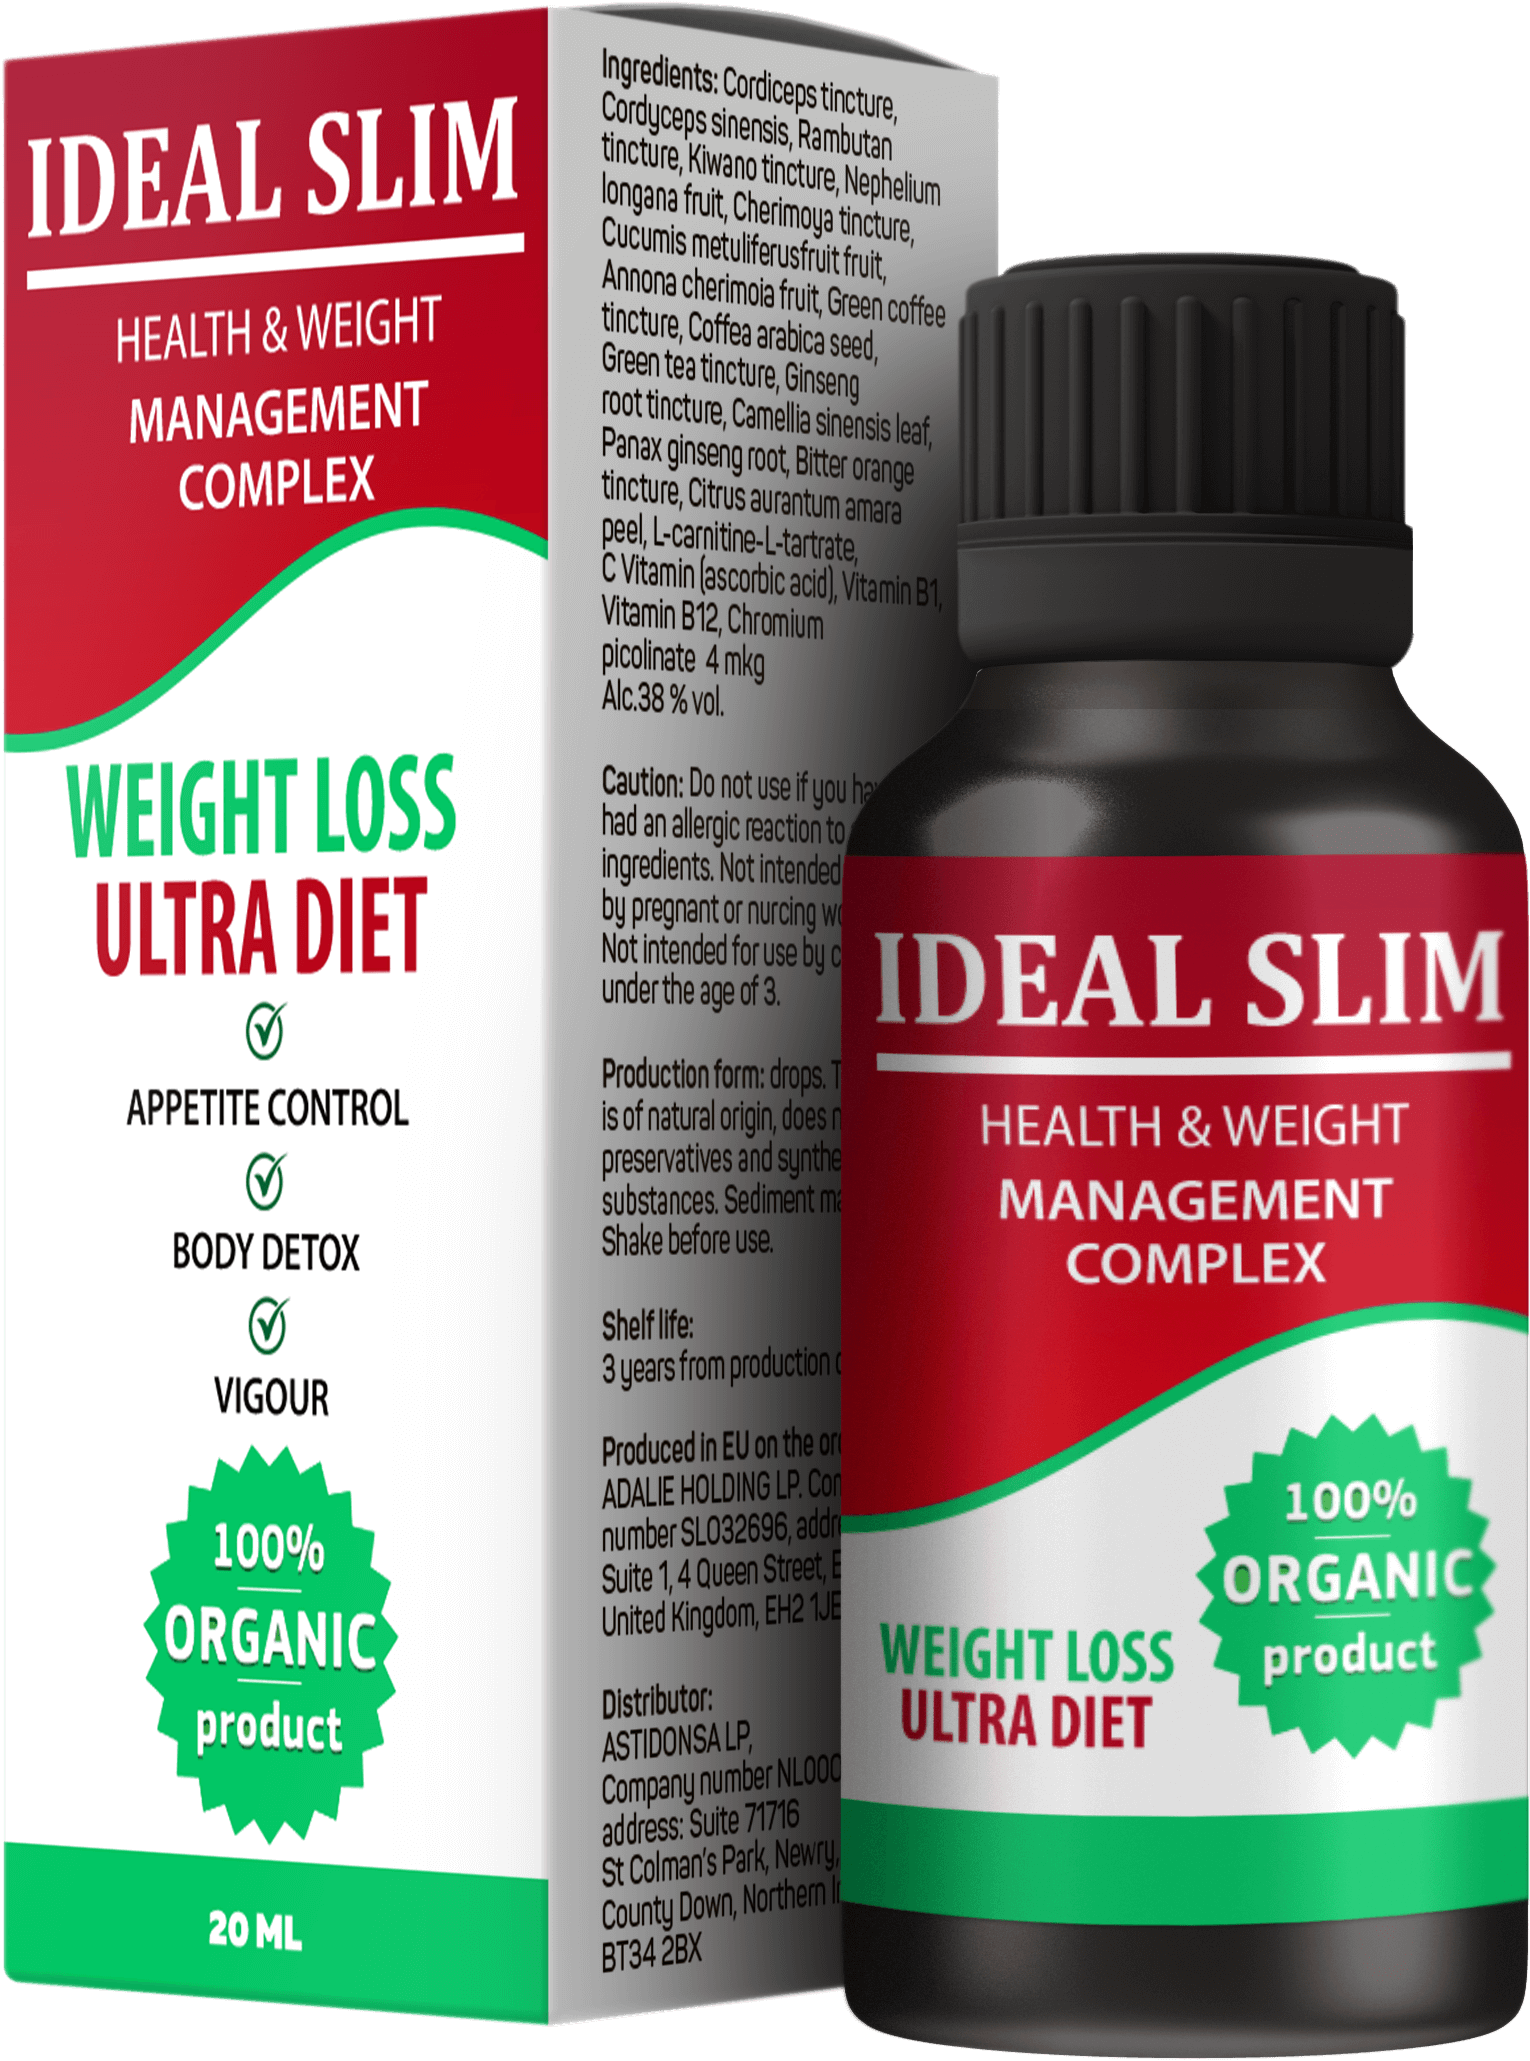 Ideal Slim Product Overview. What Is It?